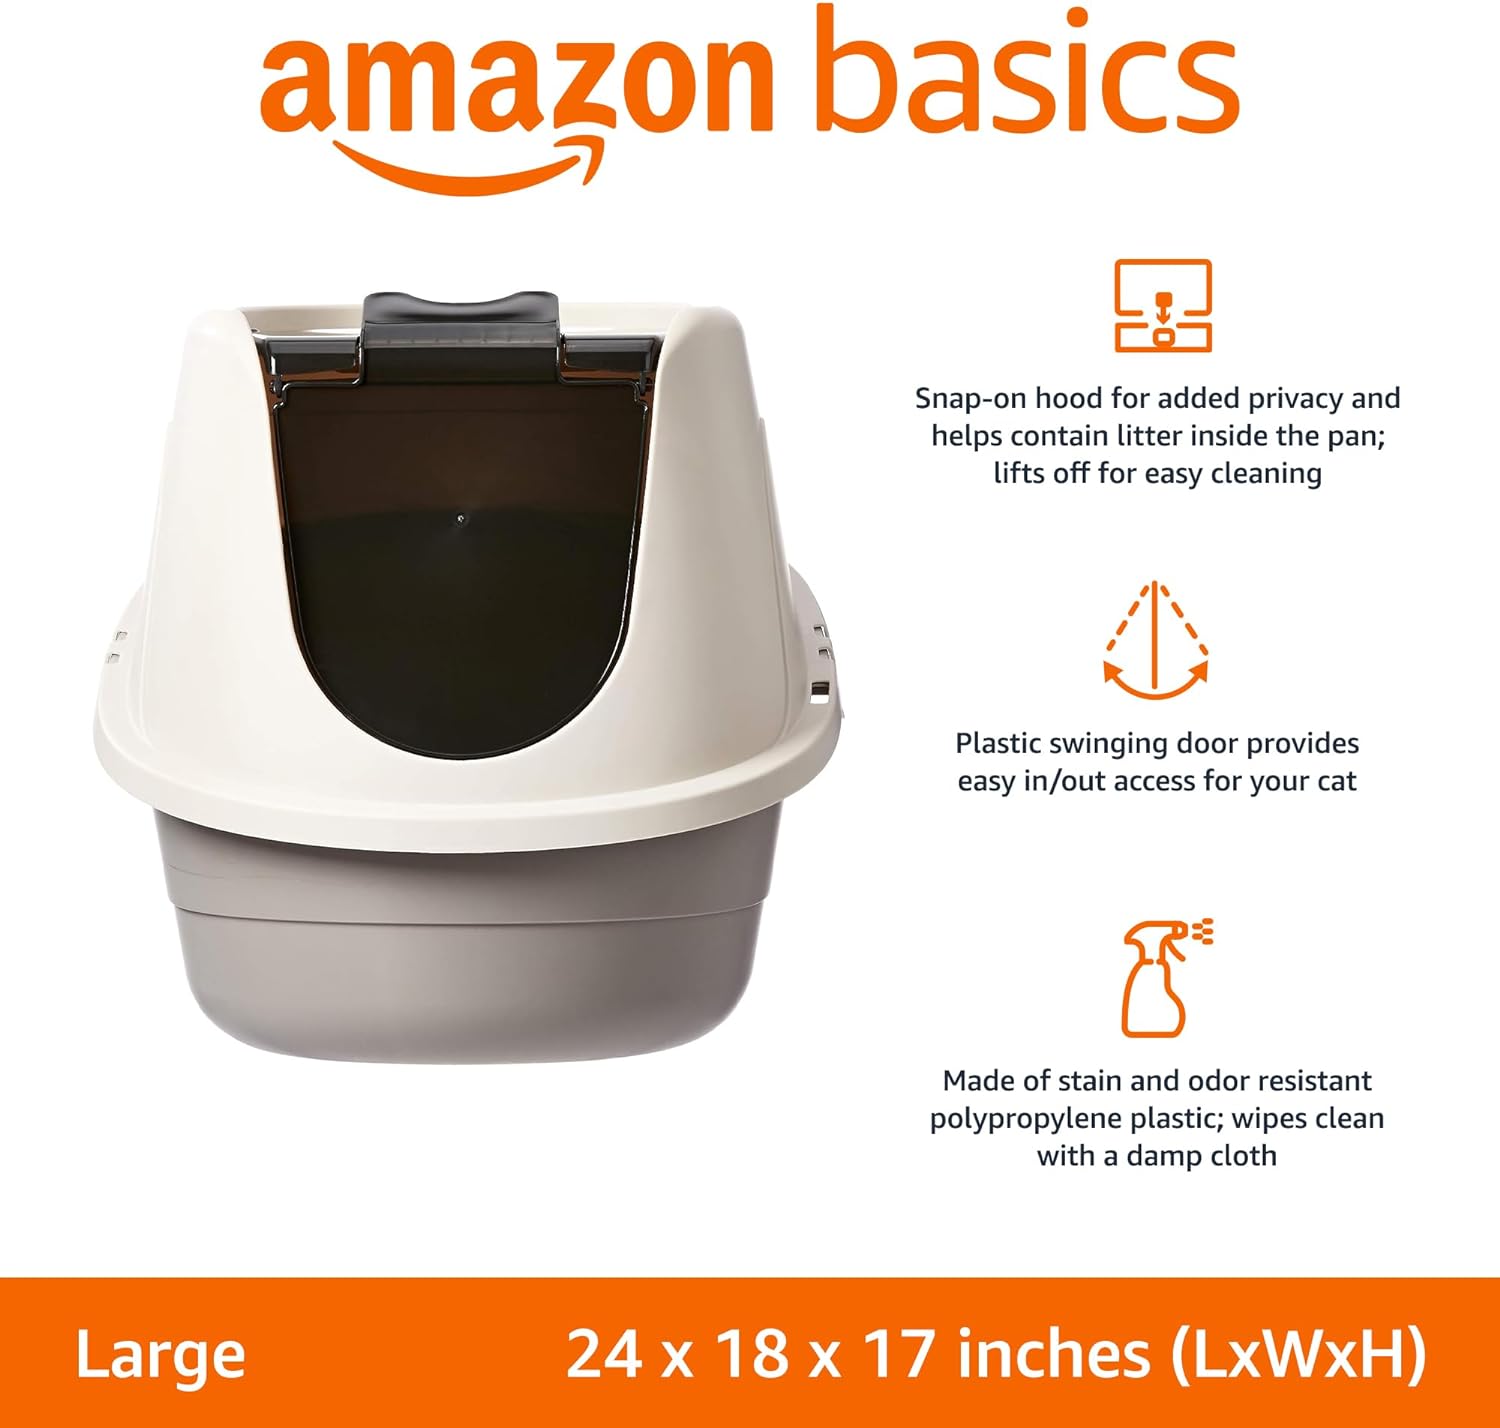 Basics No-Mess Hooded Cat Litter Box, 24 x 18 x 17 Inches, Large